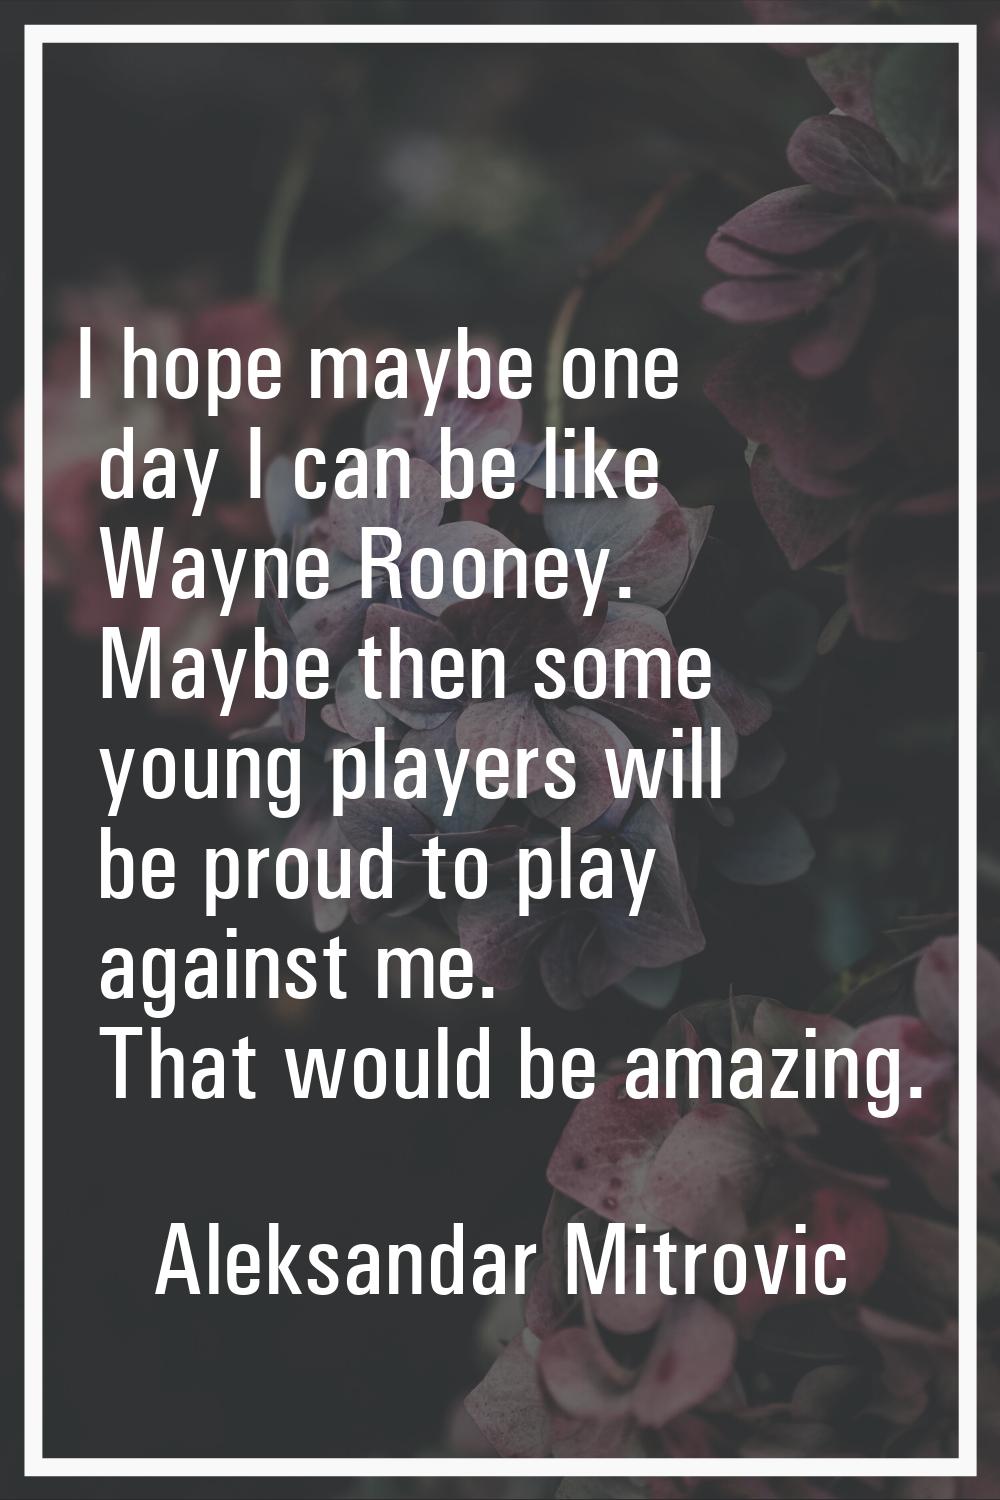 I hope maybe one day I can be like Wayne Rooney. Maybe then some young players will be proud to pla